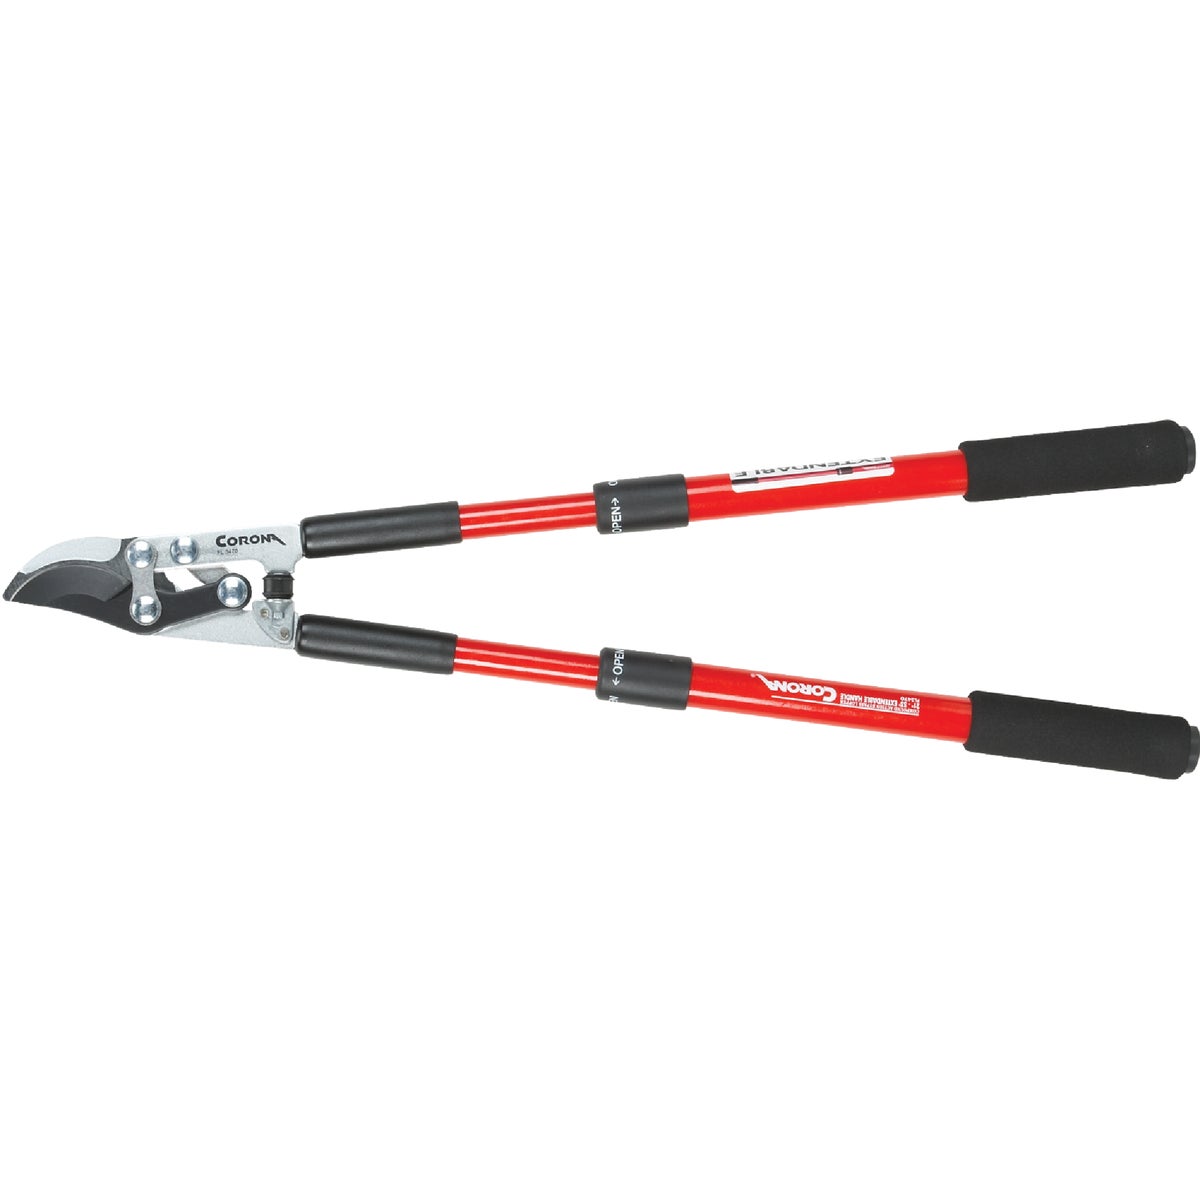 Item 738996, Compound action lopper features resharpenable nonstick, high carbon steel 